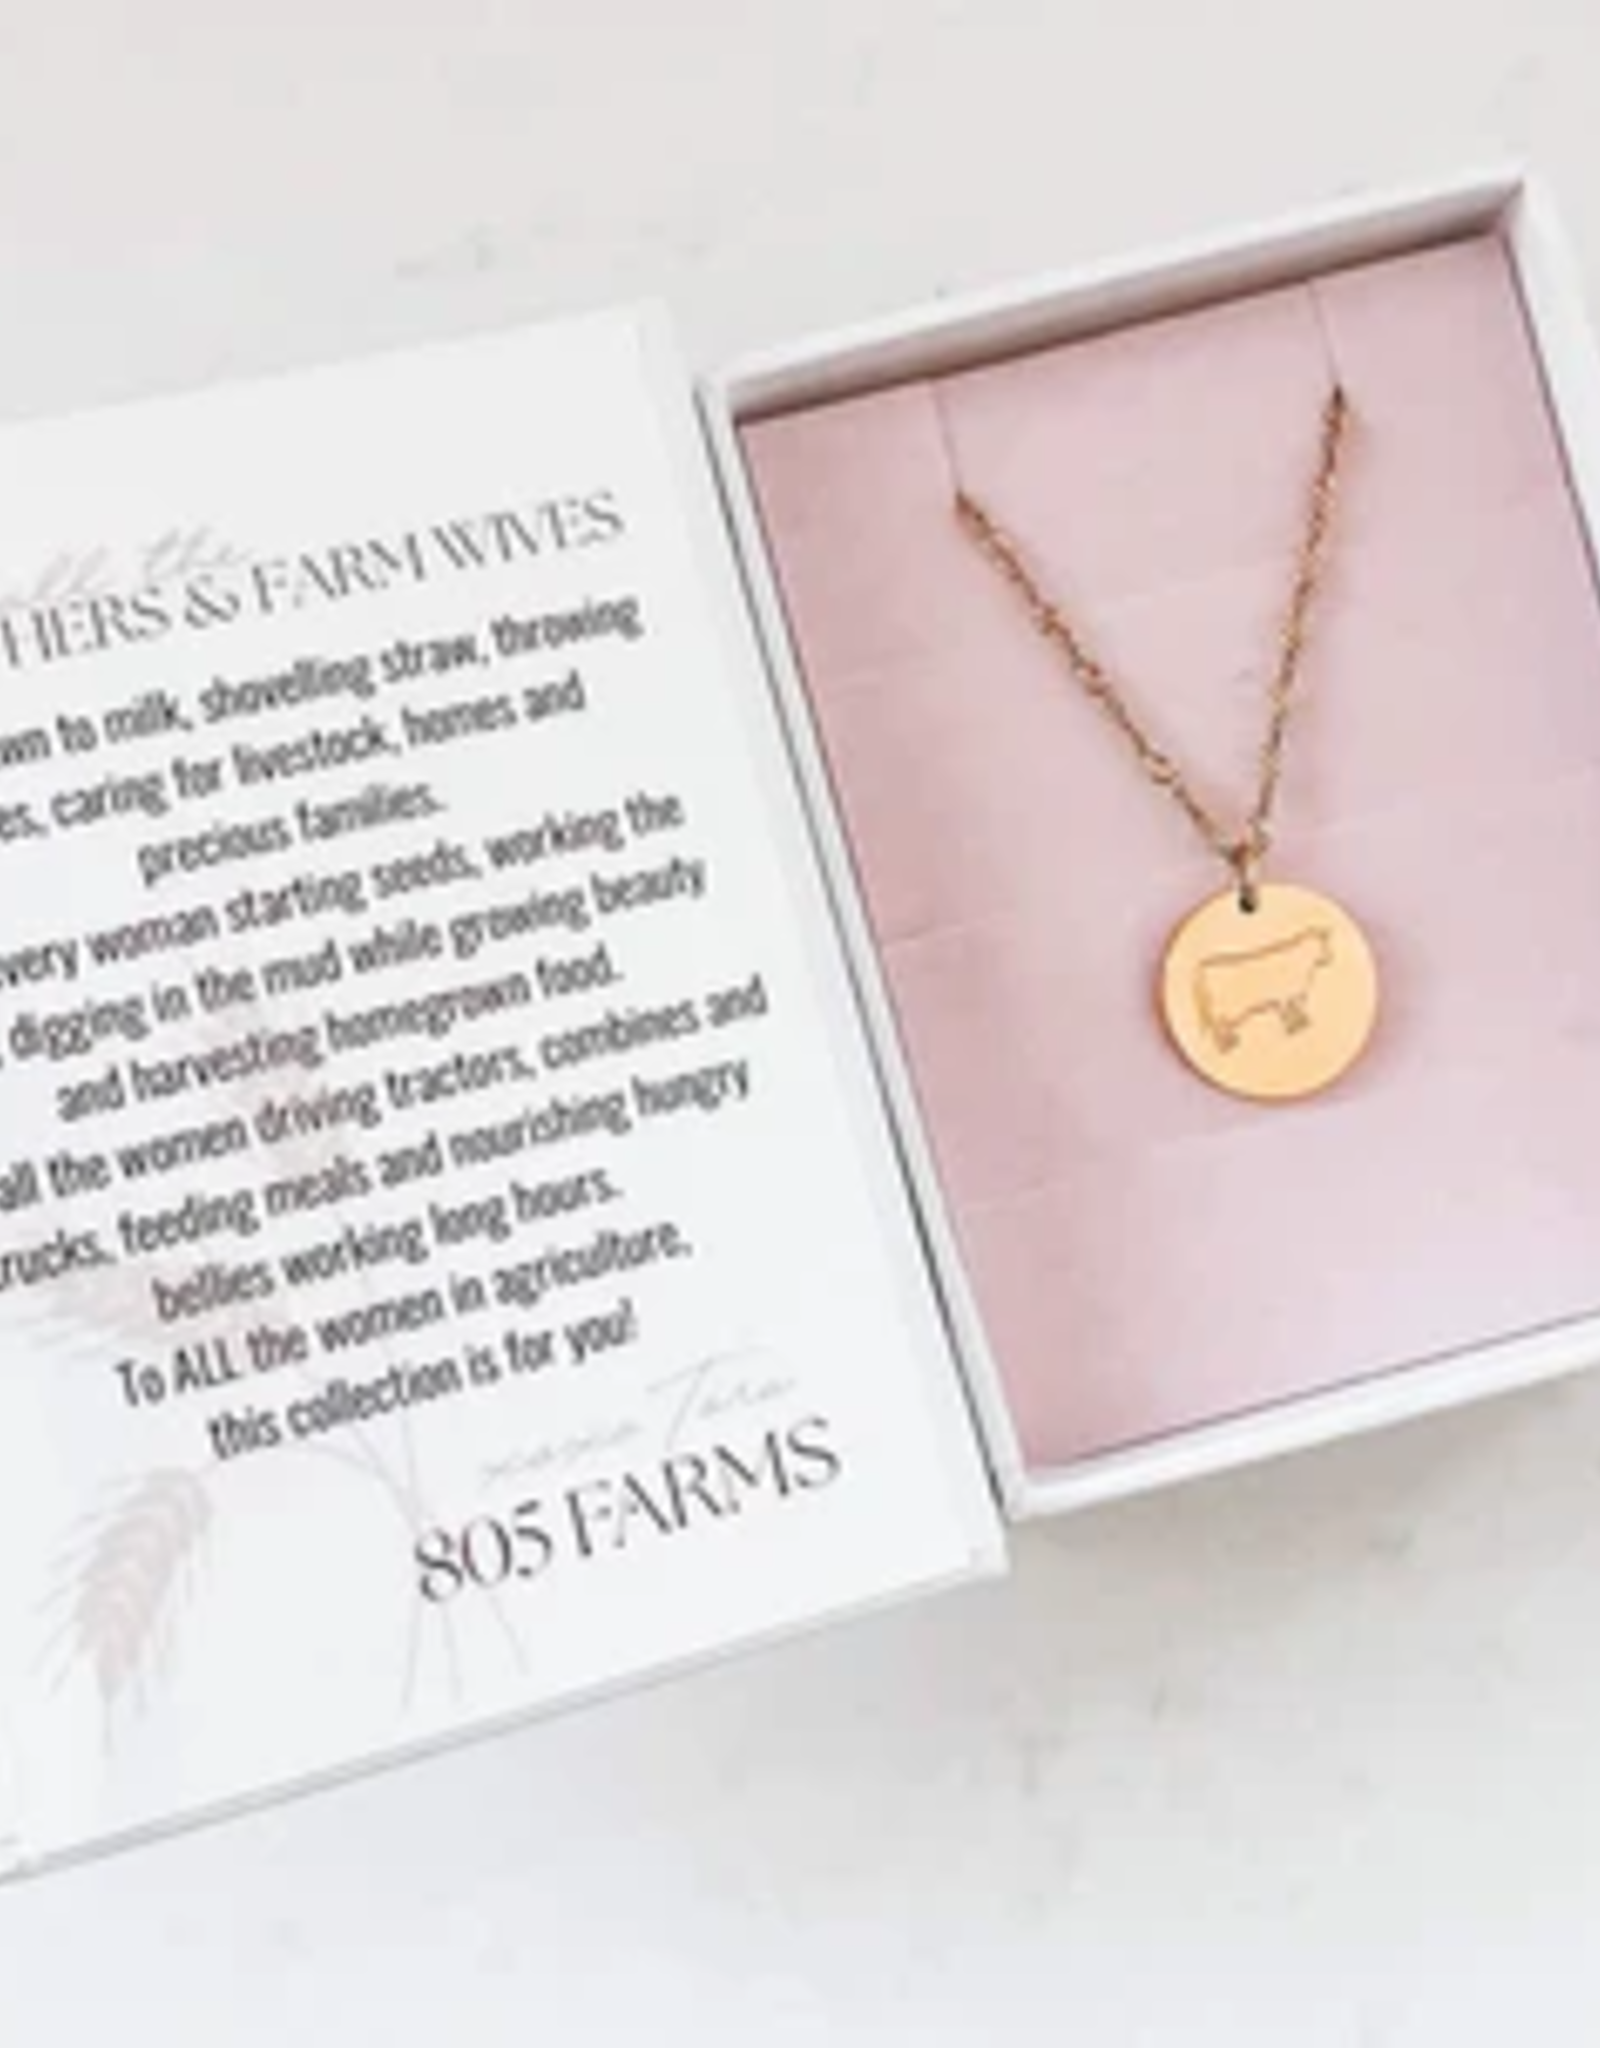 Sweet Three Designs Farm-Her Coin Necklace Collection